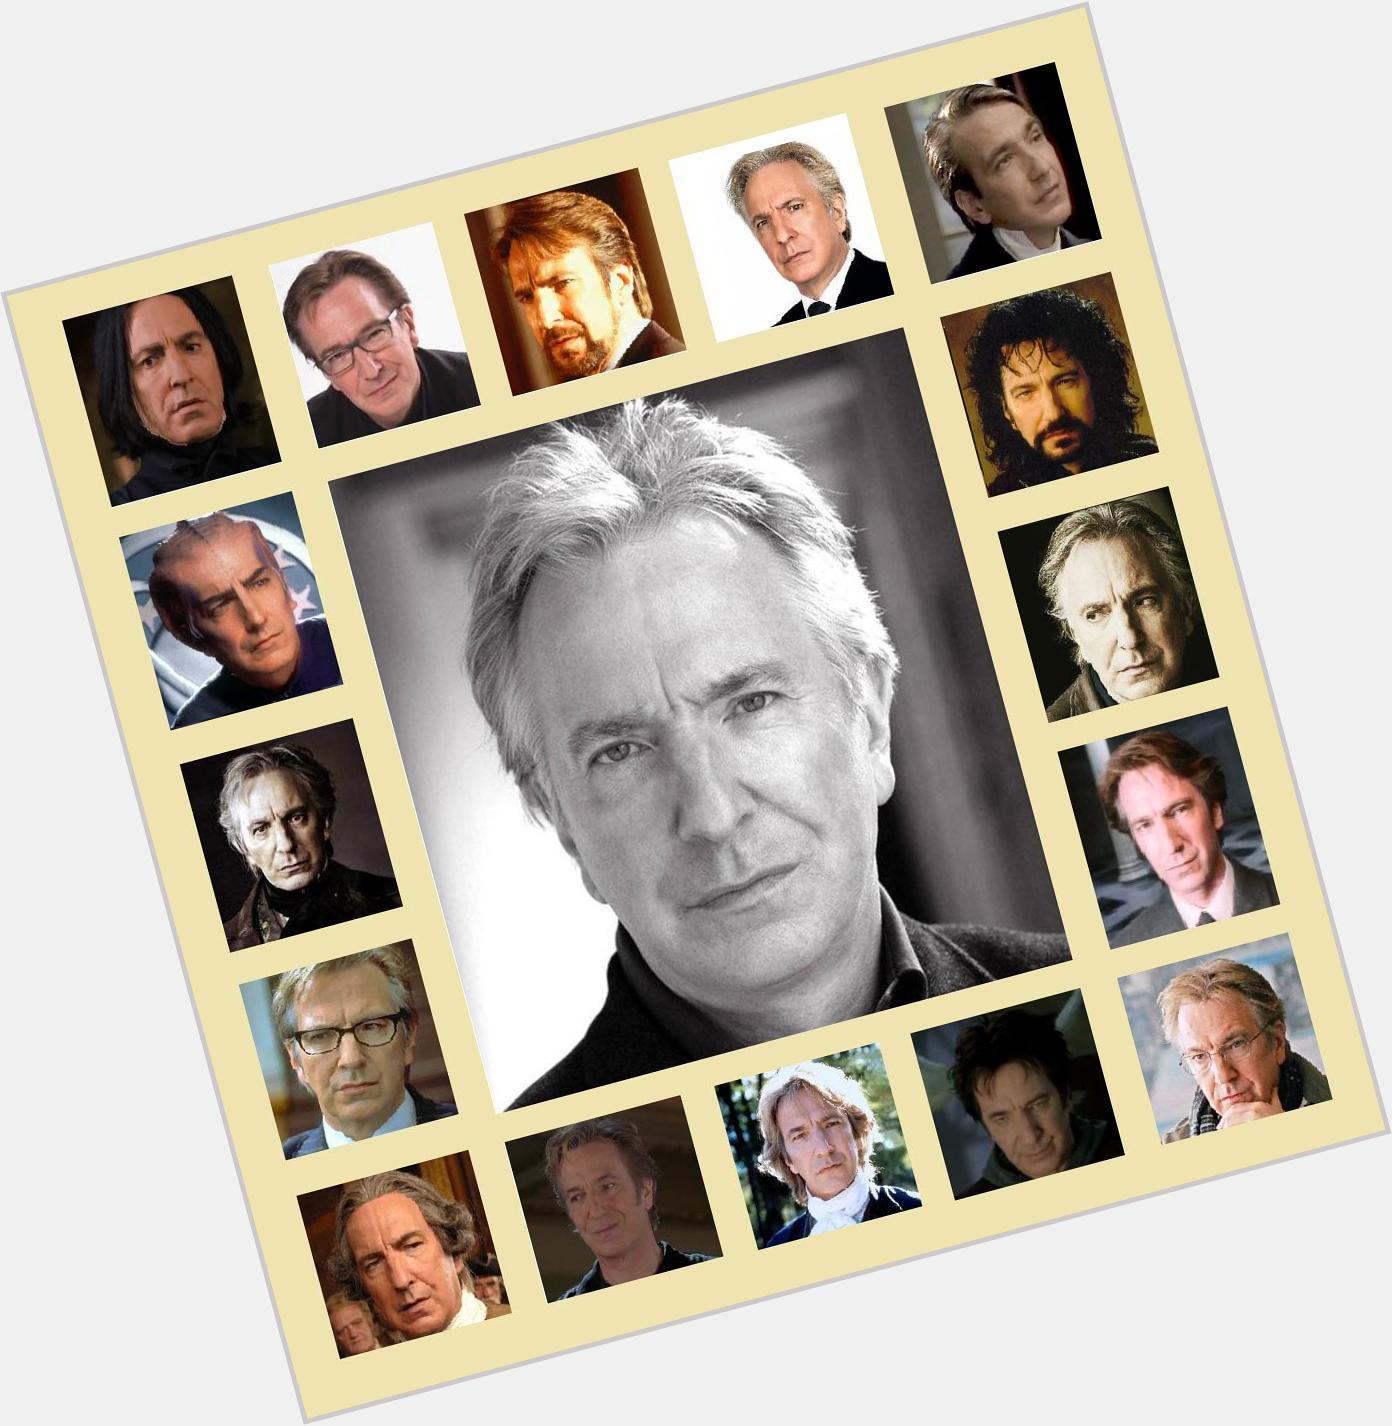 Happy Birthday Alan Rickman! And thanks again for talking to me on Sunday. 